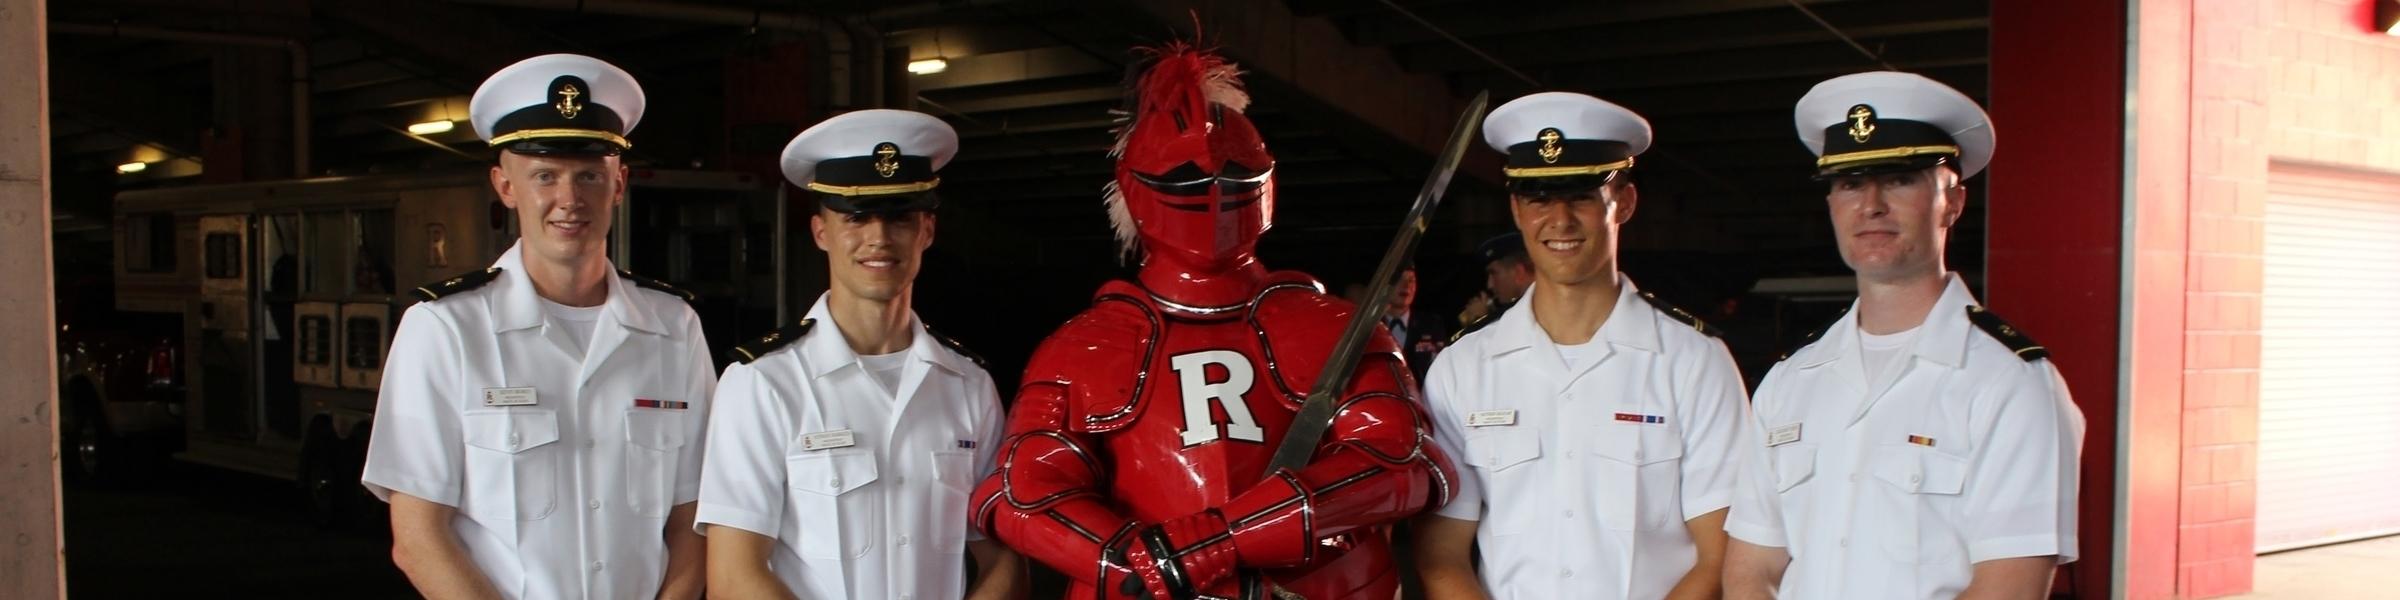 Scarlet Knight with Midshipmen at Military Appreciation Game